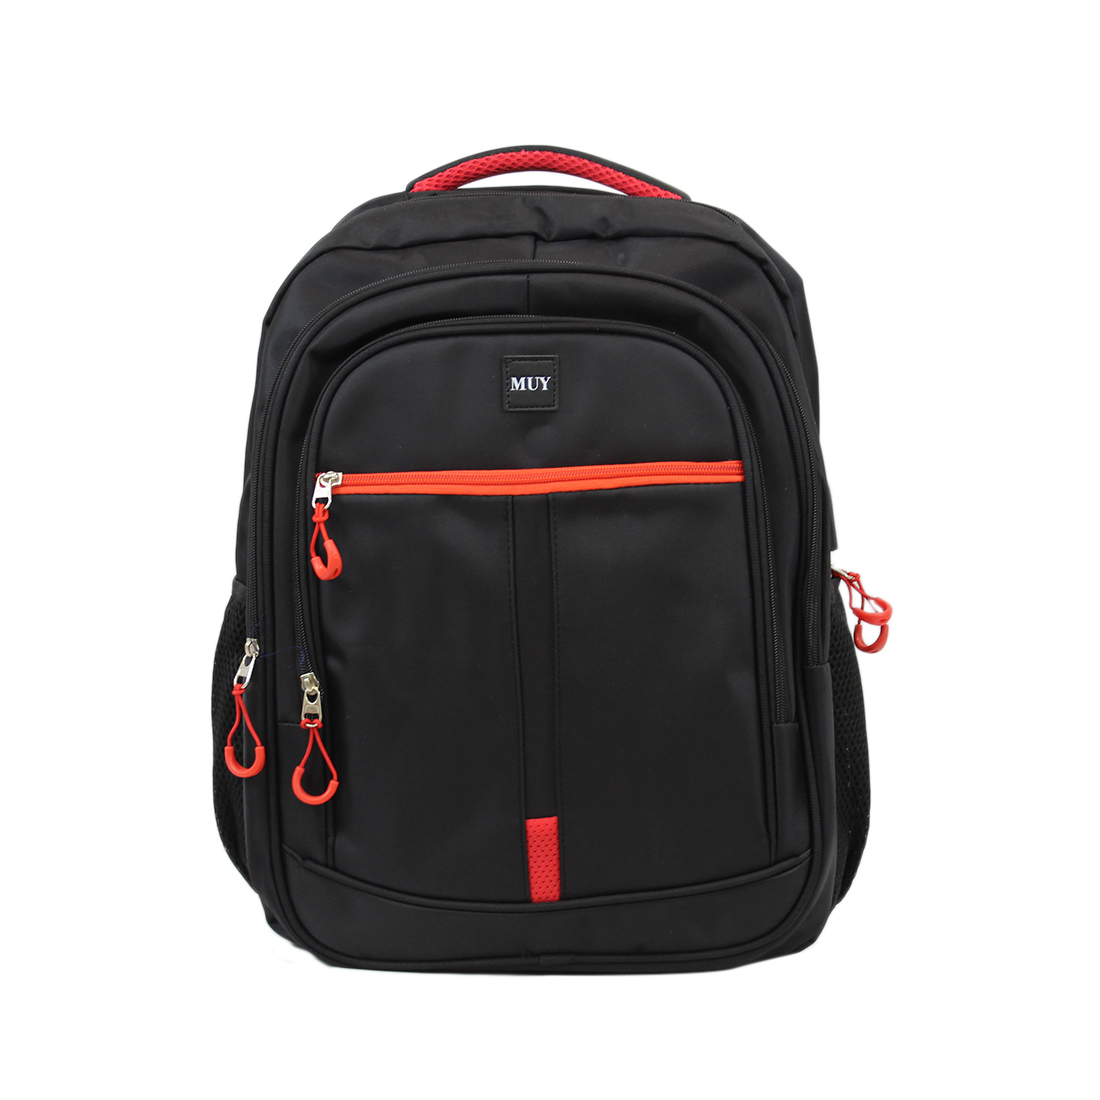 Plain backpack with zips infront